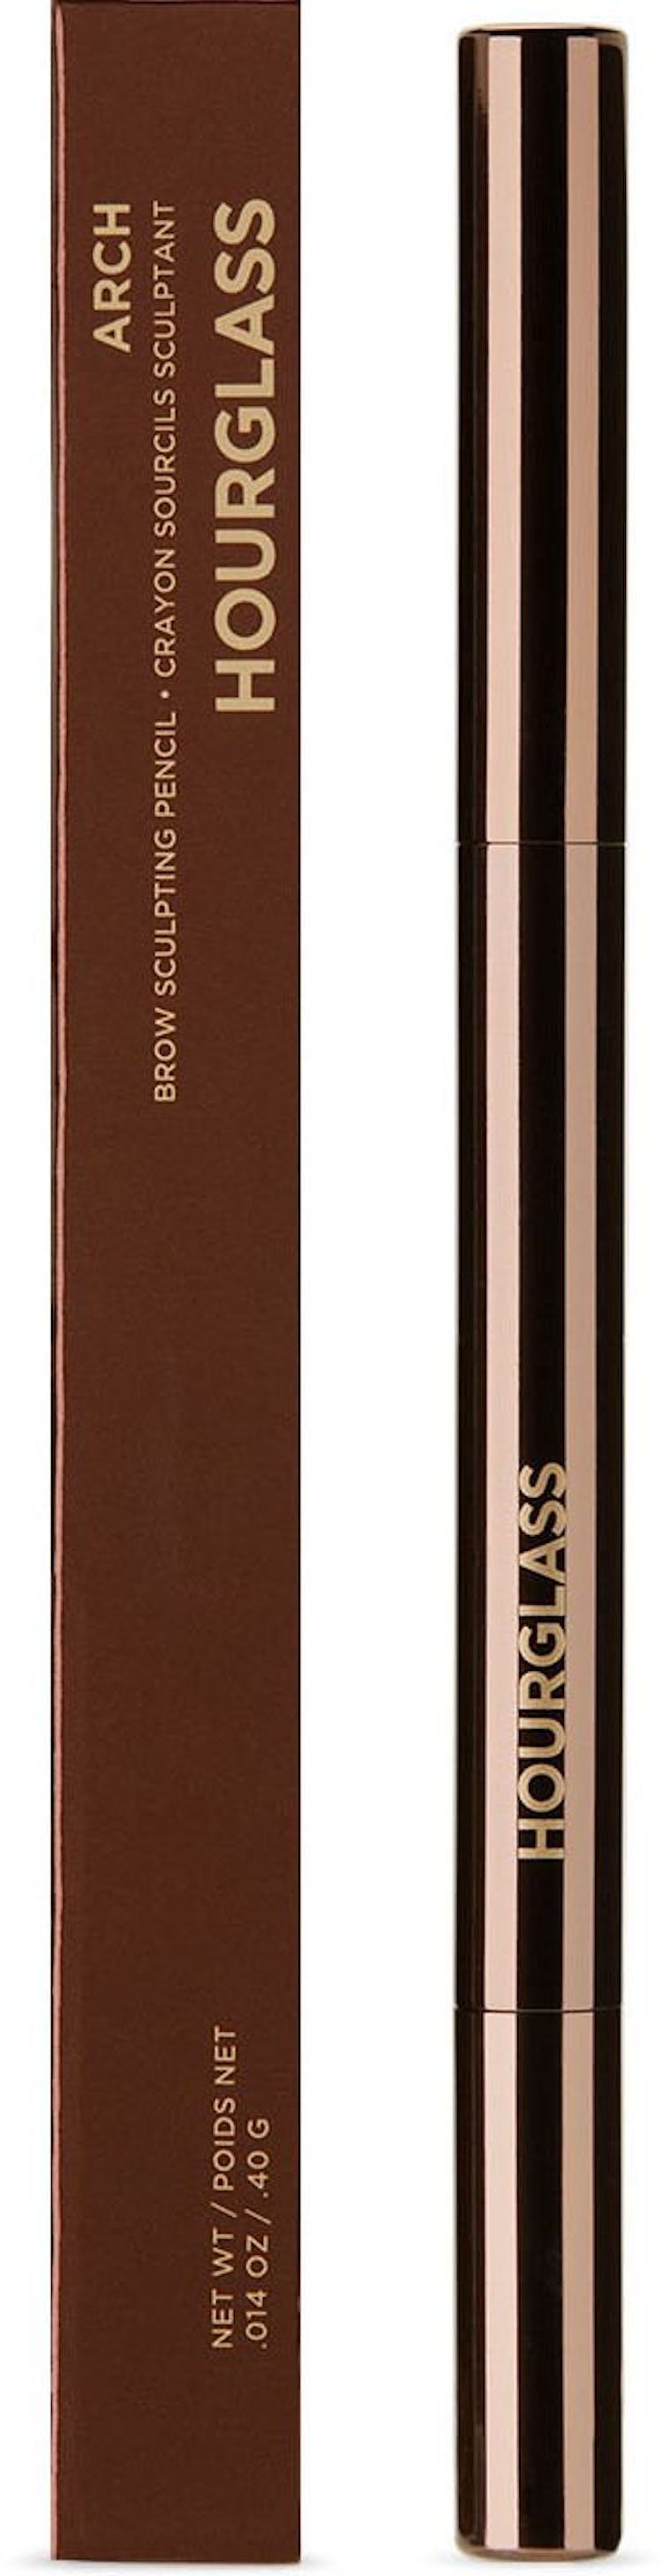 Arch Brow Sculpting Pencil – Soft Brunette: additional image